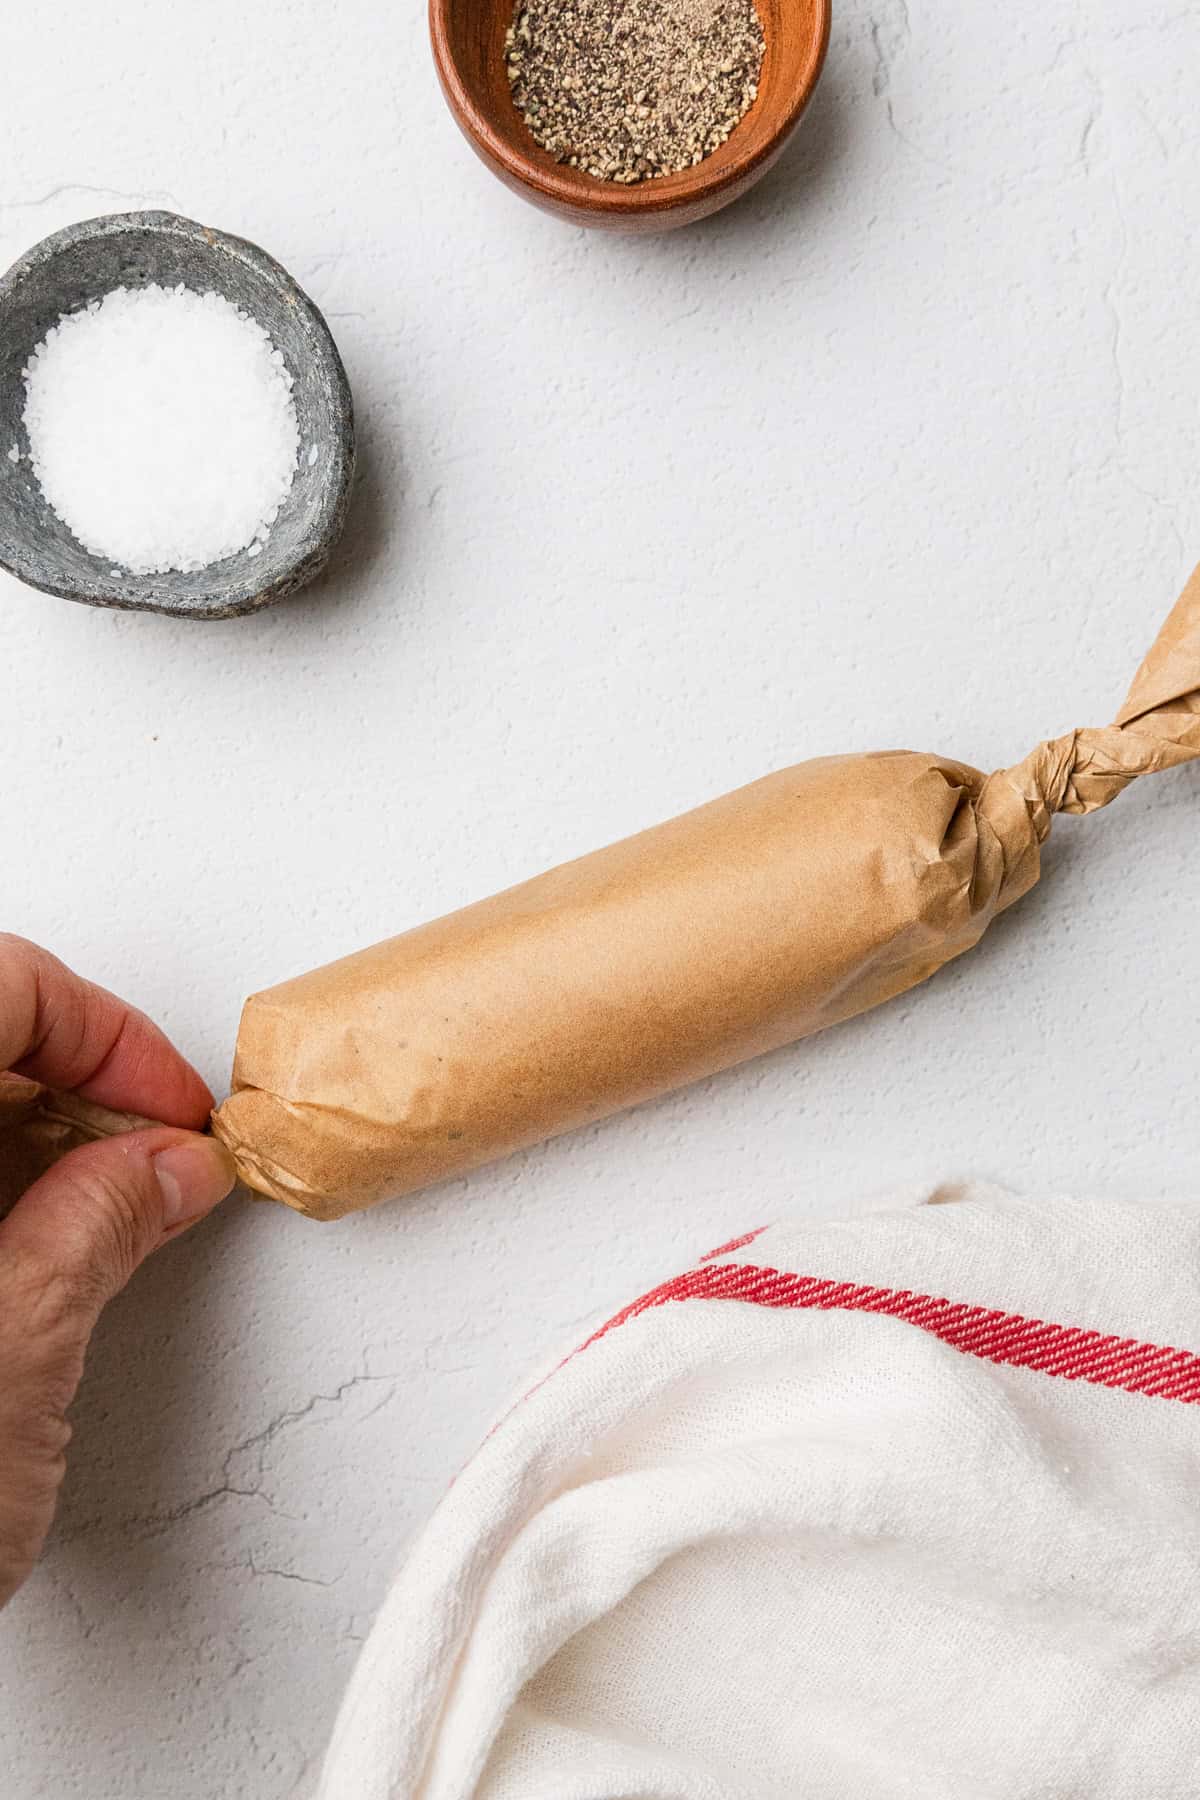 Rolling the butter into a log using the parchment paper.